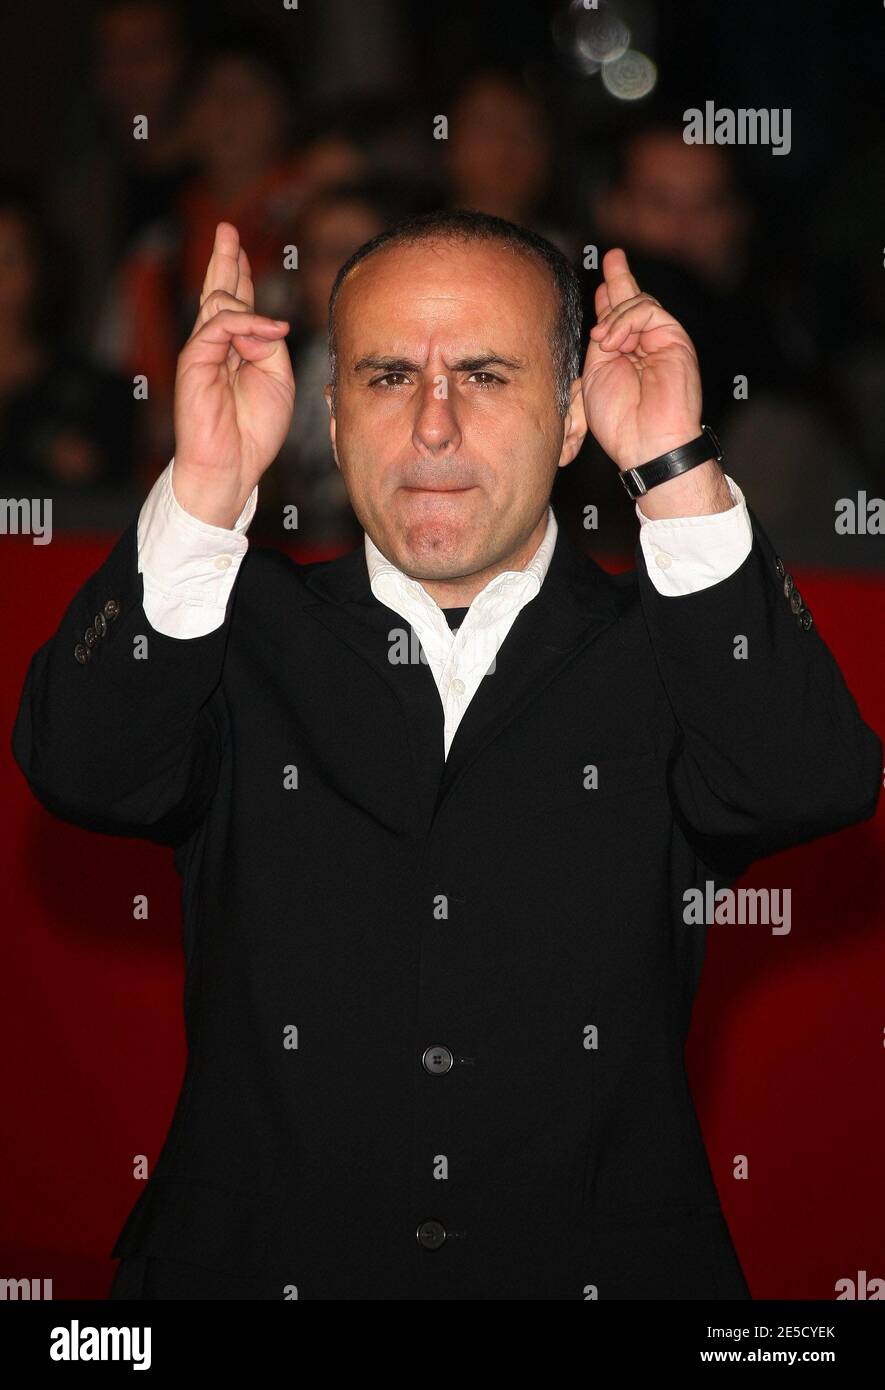 Ilan Duran Cohen arriving on red carpet for Le Plaisir De Chanter screening as part of the 3rd 'Rome Film Festival' in Rome, Italy on October 28, 2008. Photo by Denis Guignebourg/ABACAPRESS.COM Stock Photo